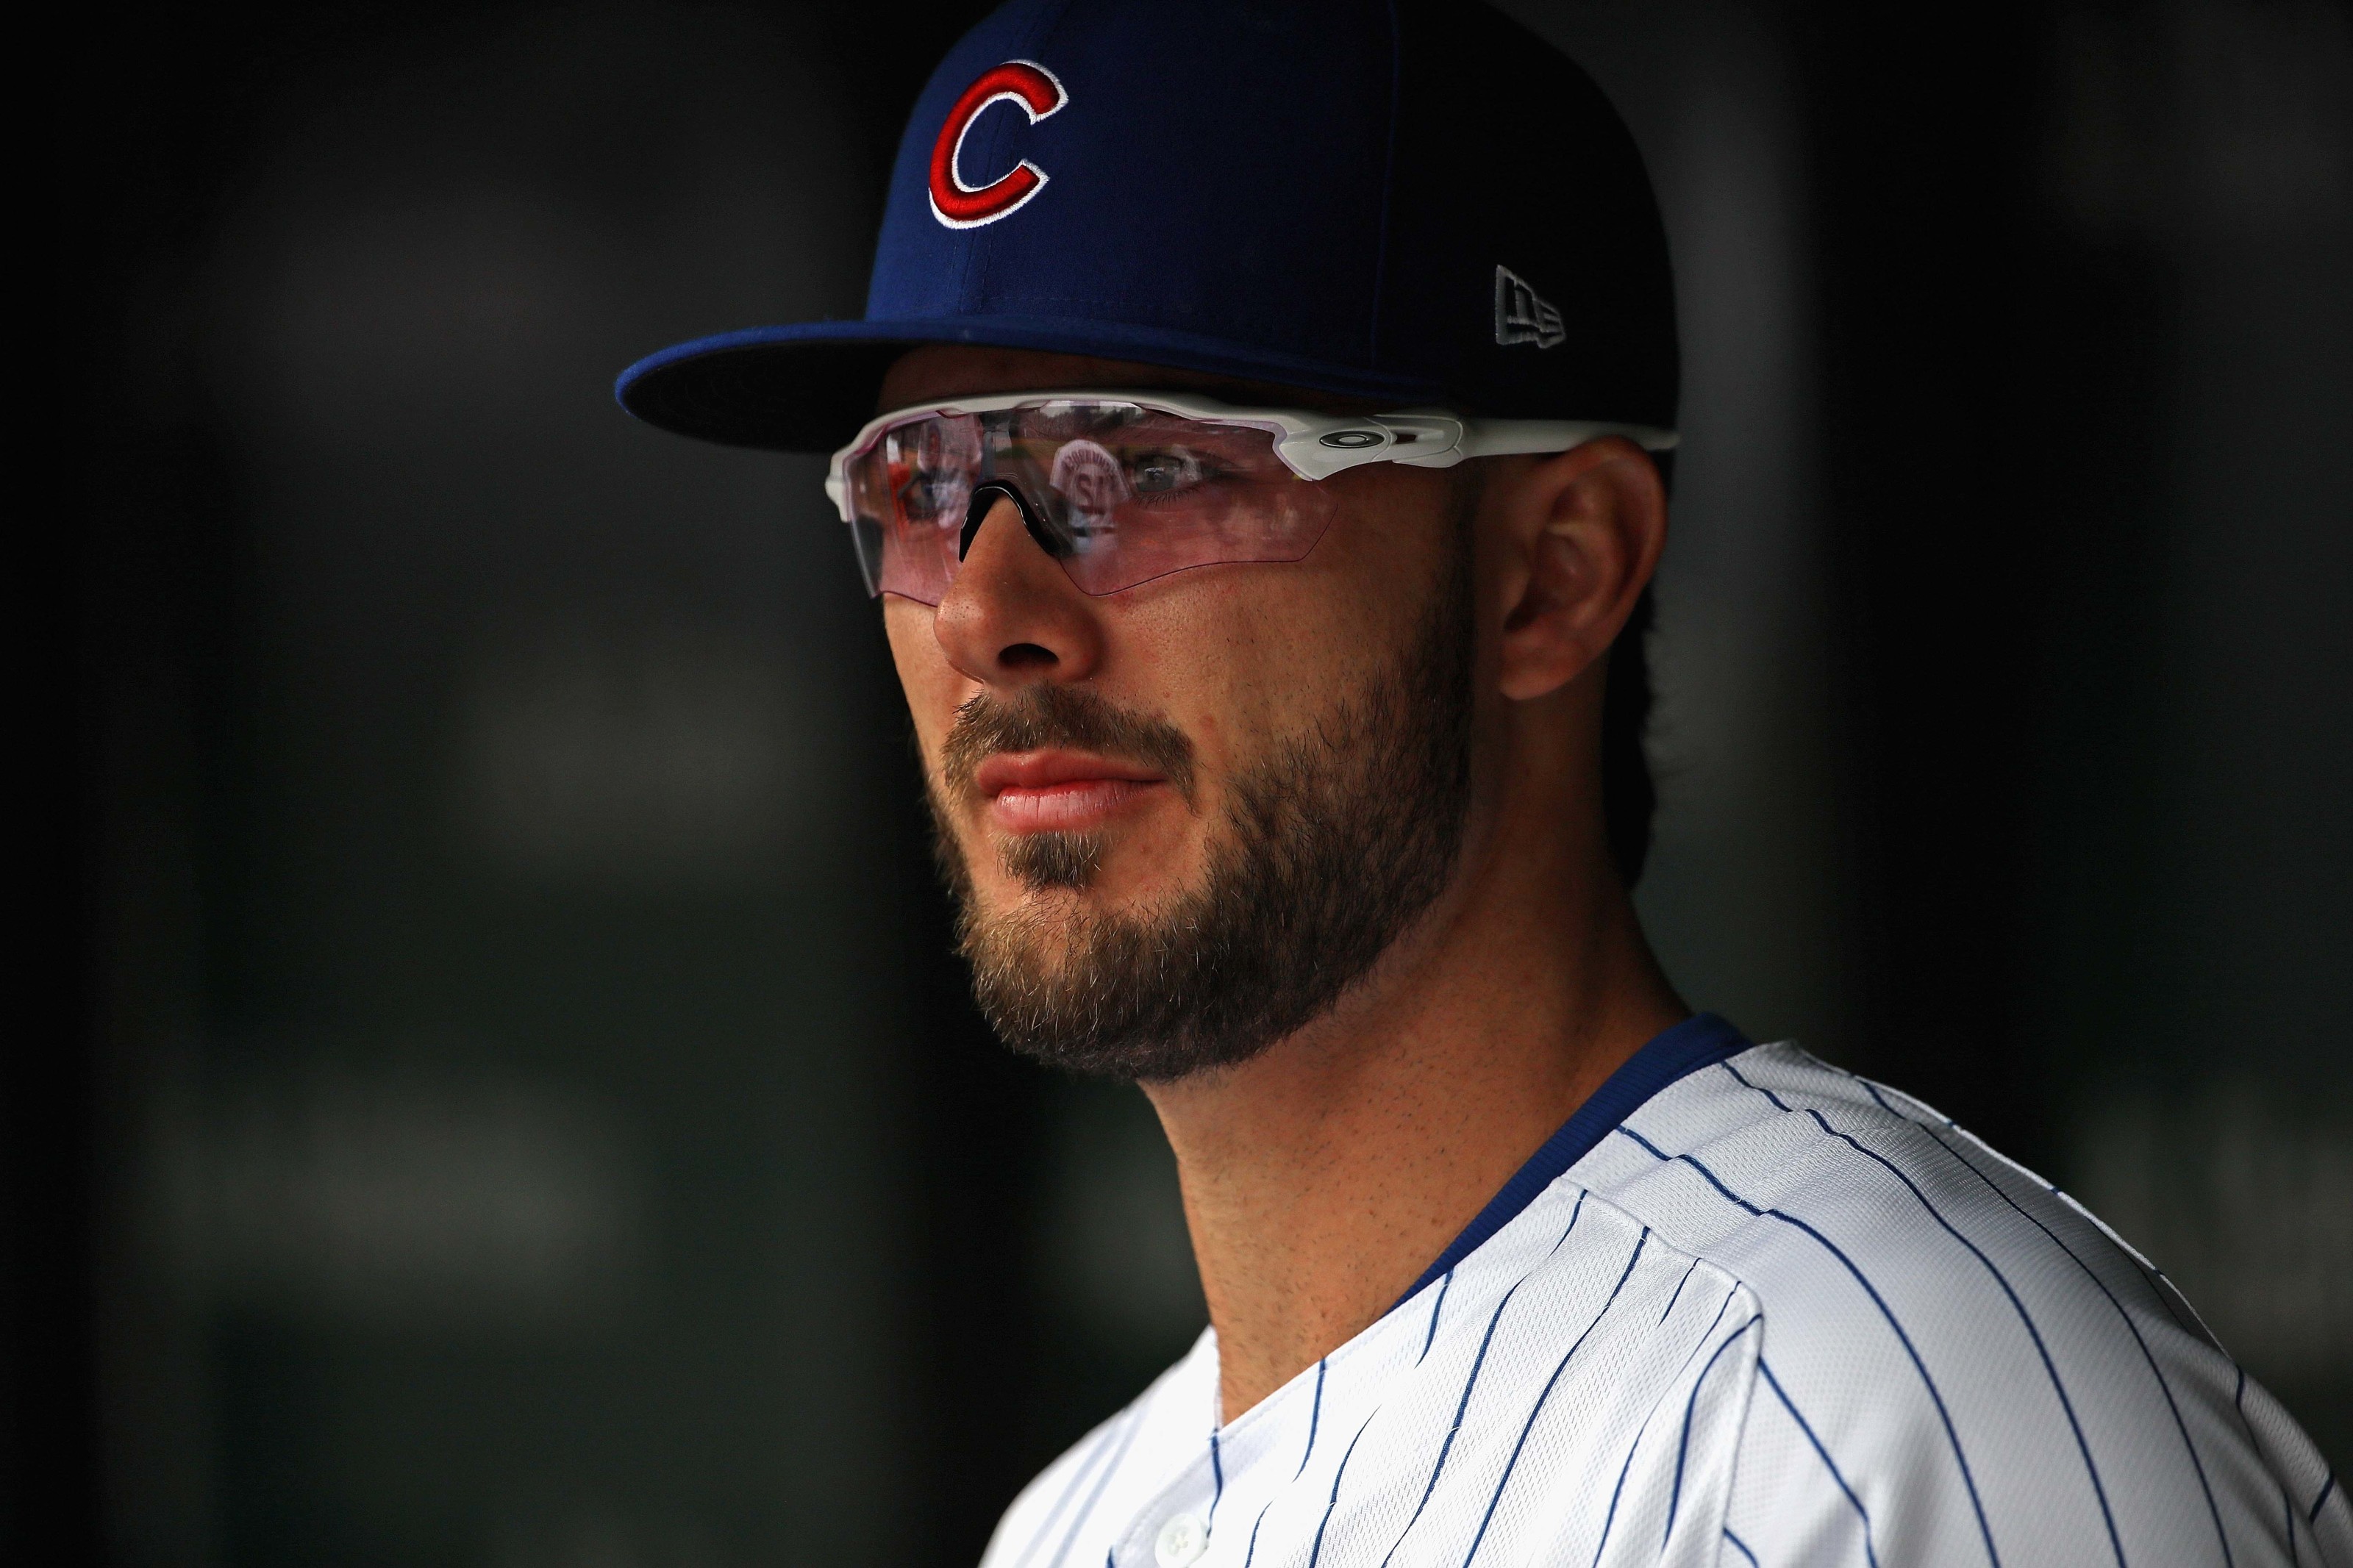 Kris Bryant's Cubs future hinges on first half of 2020 season